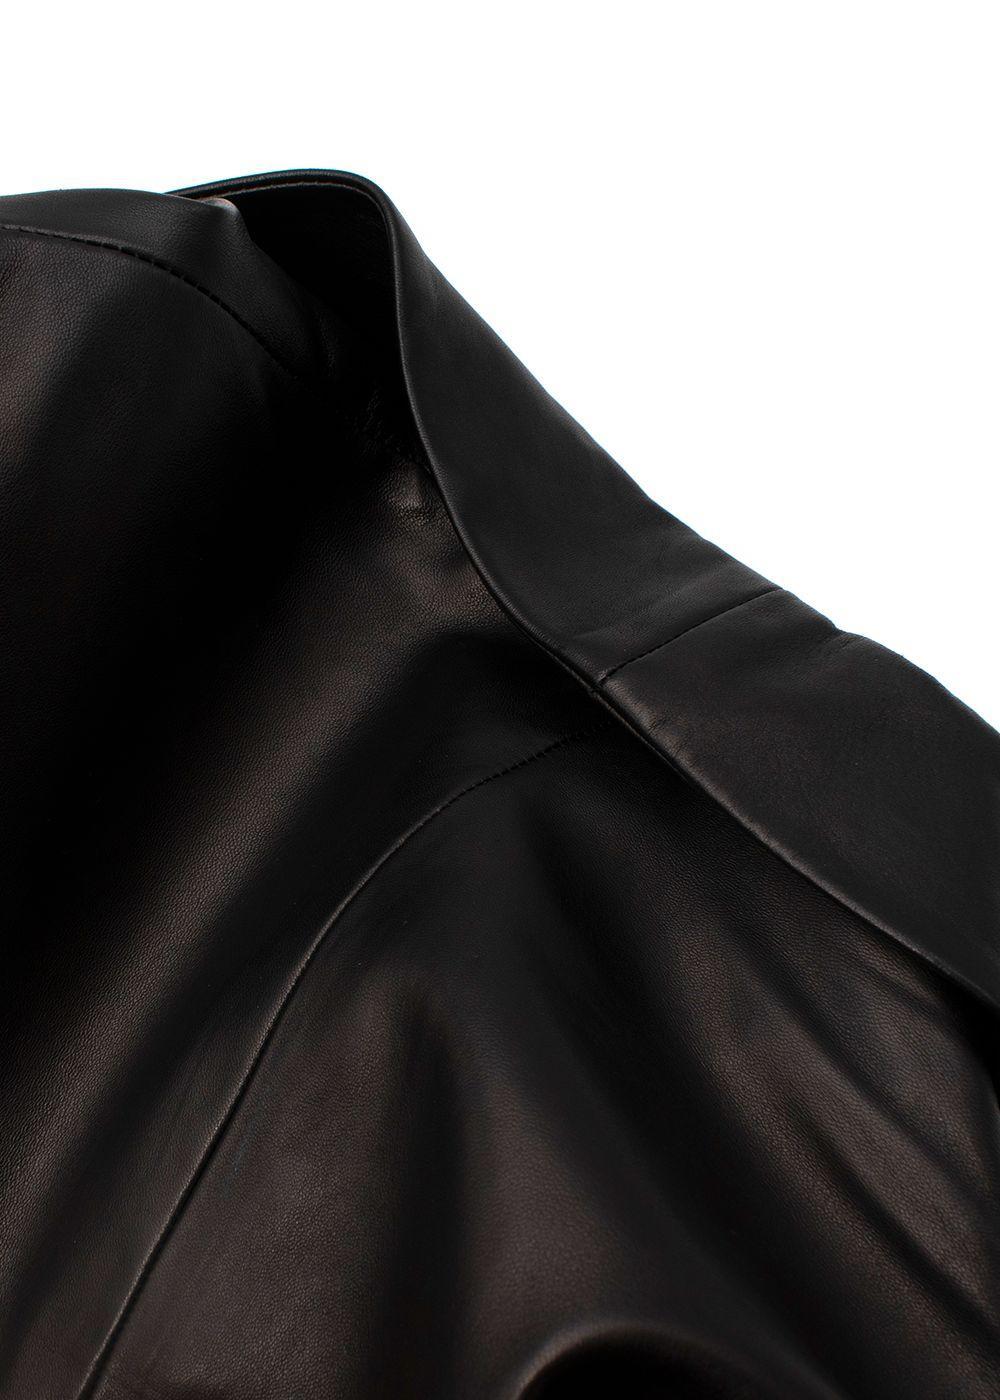 The Row Black Leather Jacket - US 6 For Sale 3